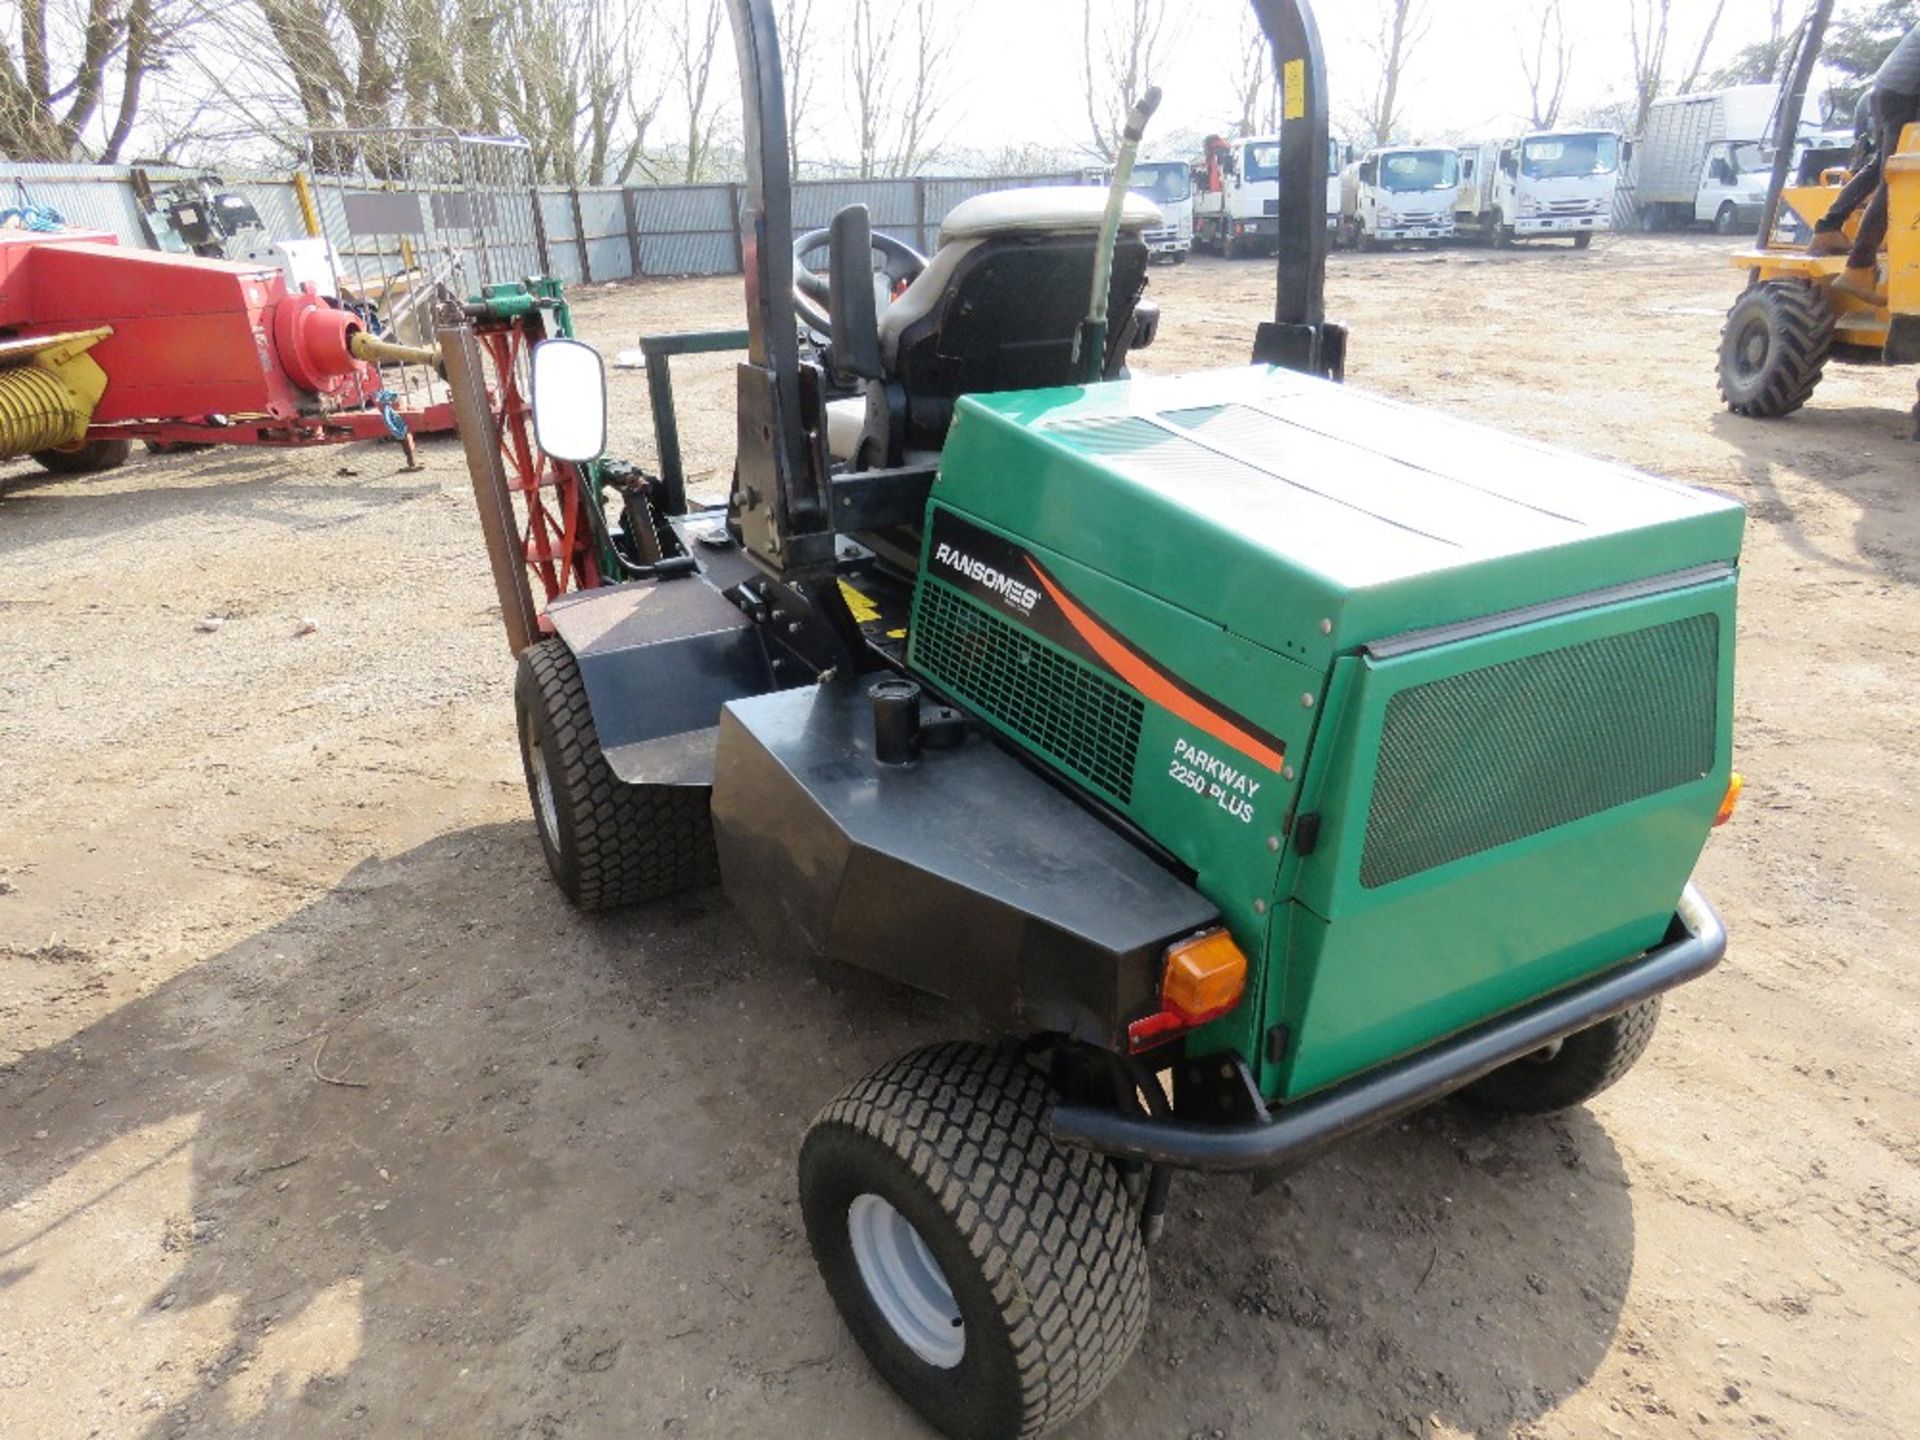 RANSOMES PARKWAY 2250 PLUS PROFESSIONAL TRIPLE RIDE ON MOWER, 4WD, 3300 REC HOURS. DIRECT FROM GOLF - Image 4 of 11